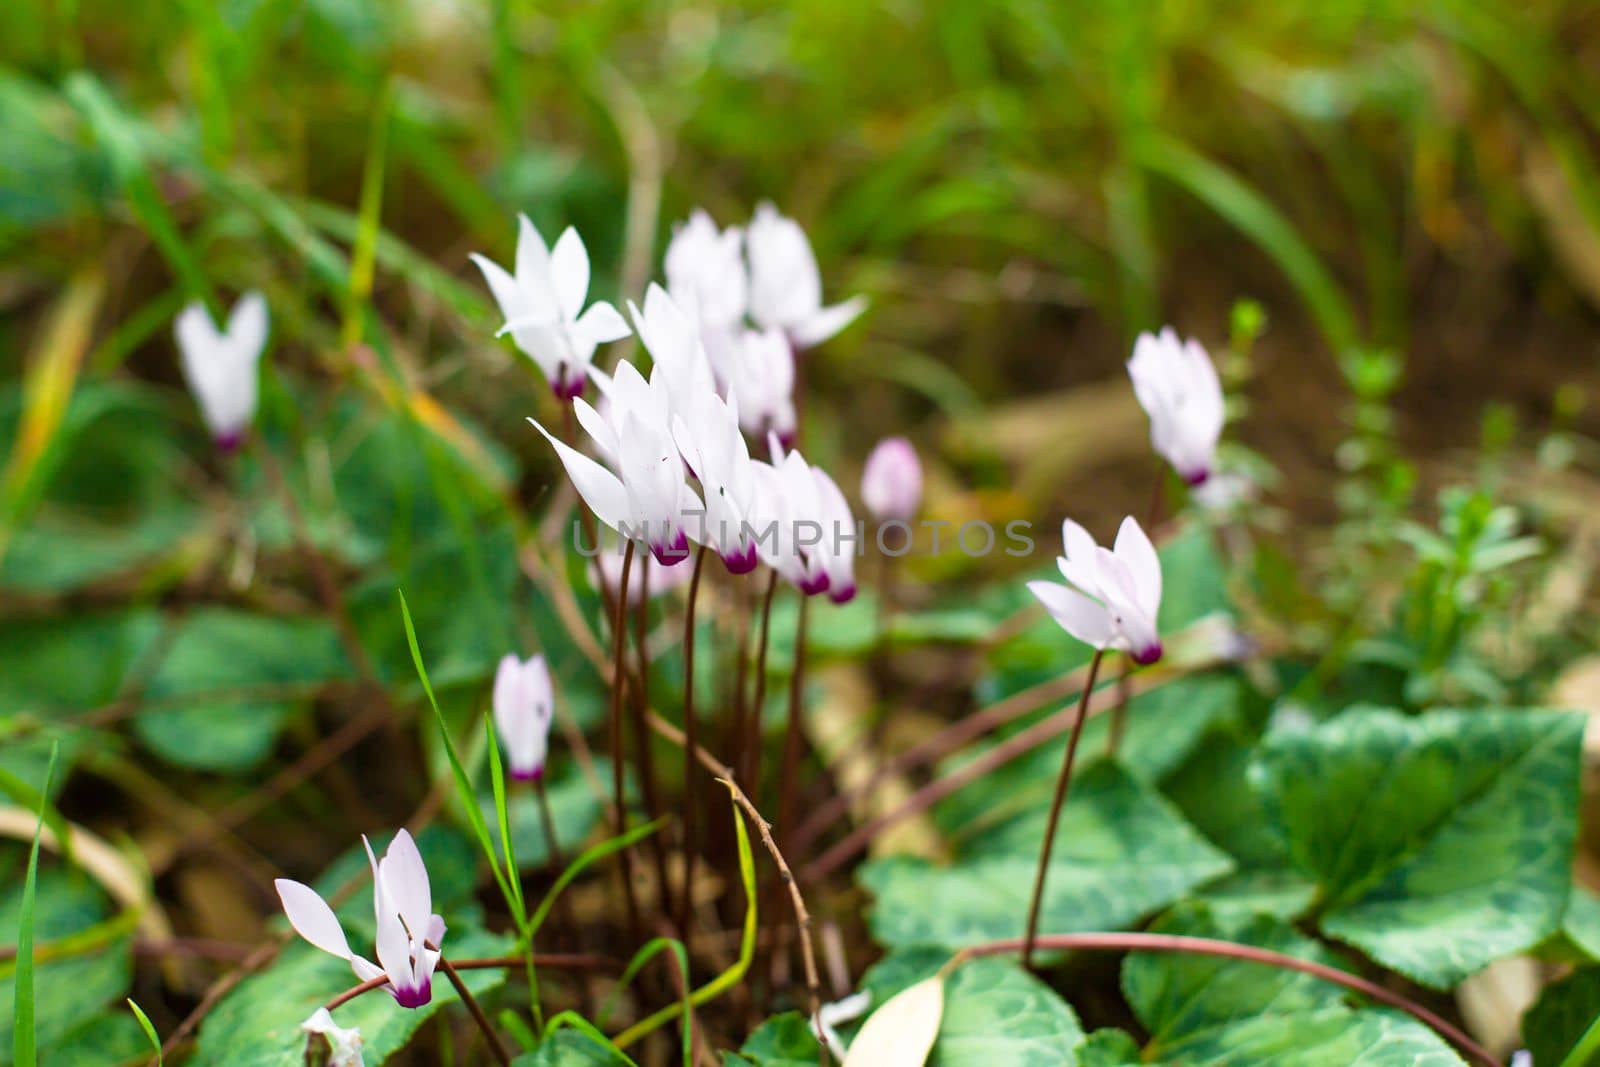 Blooming cyclamen flowers in green spring grass.